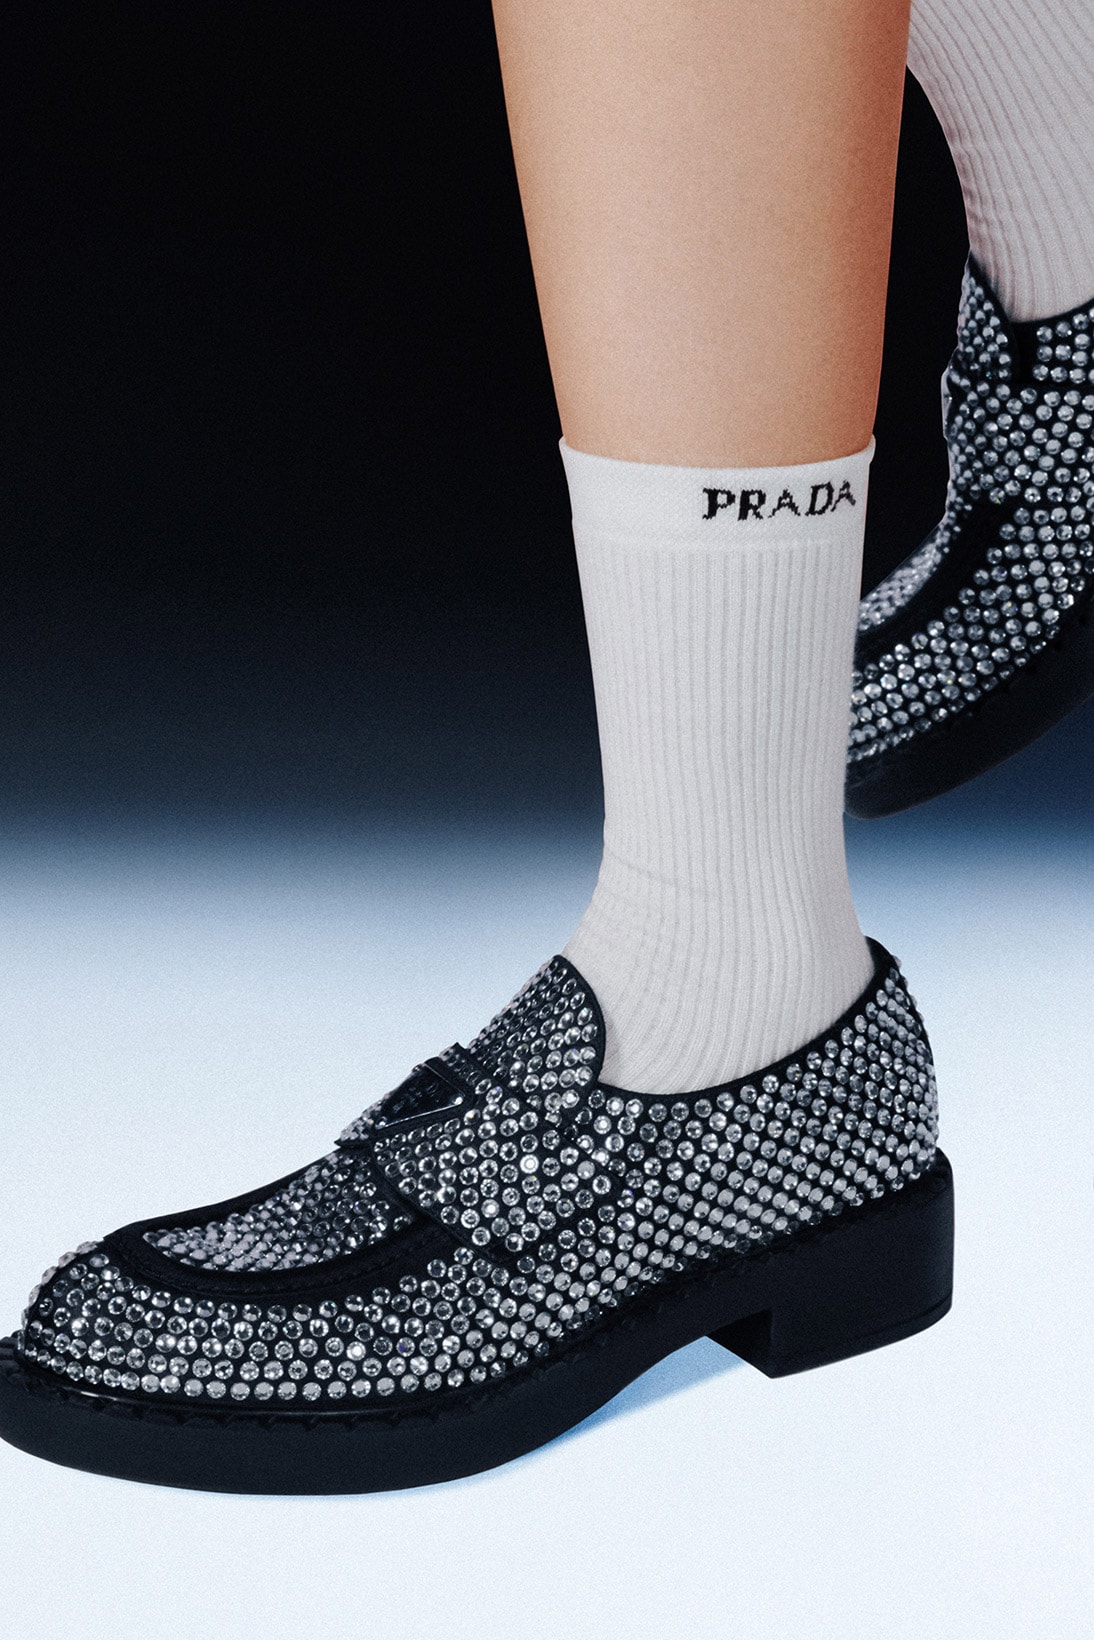 Prada Chinese Valentines Day Qixi Festival loafers crystals socks